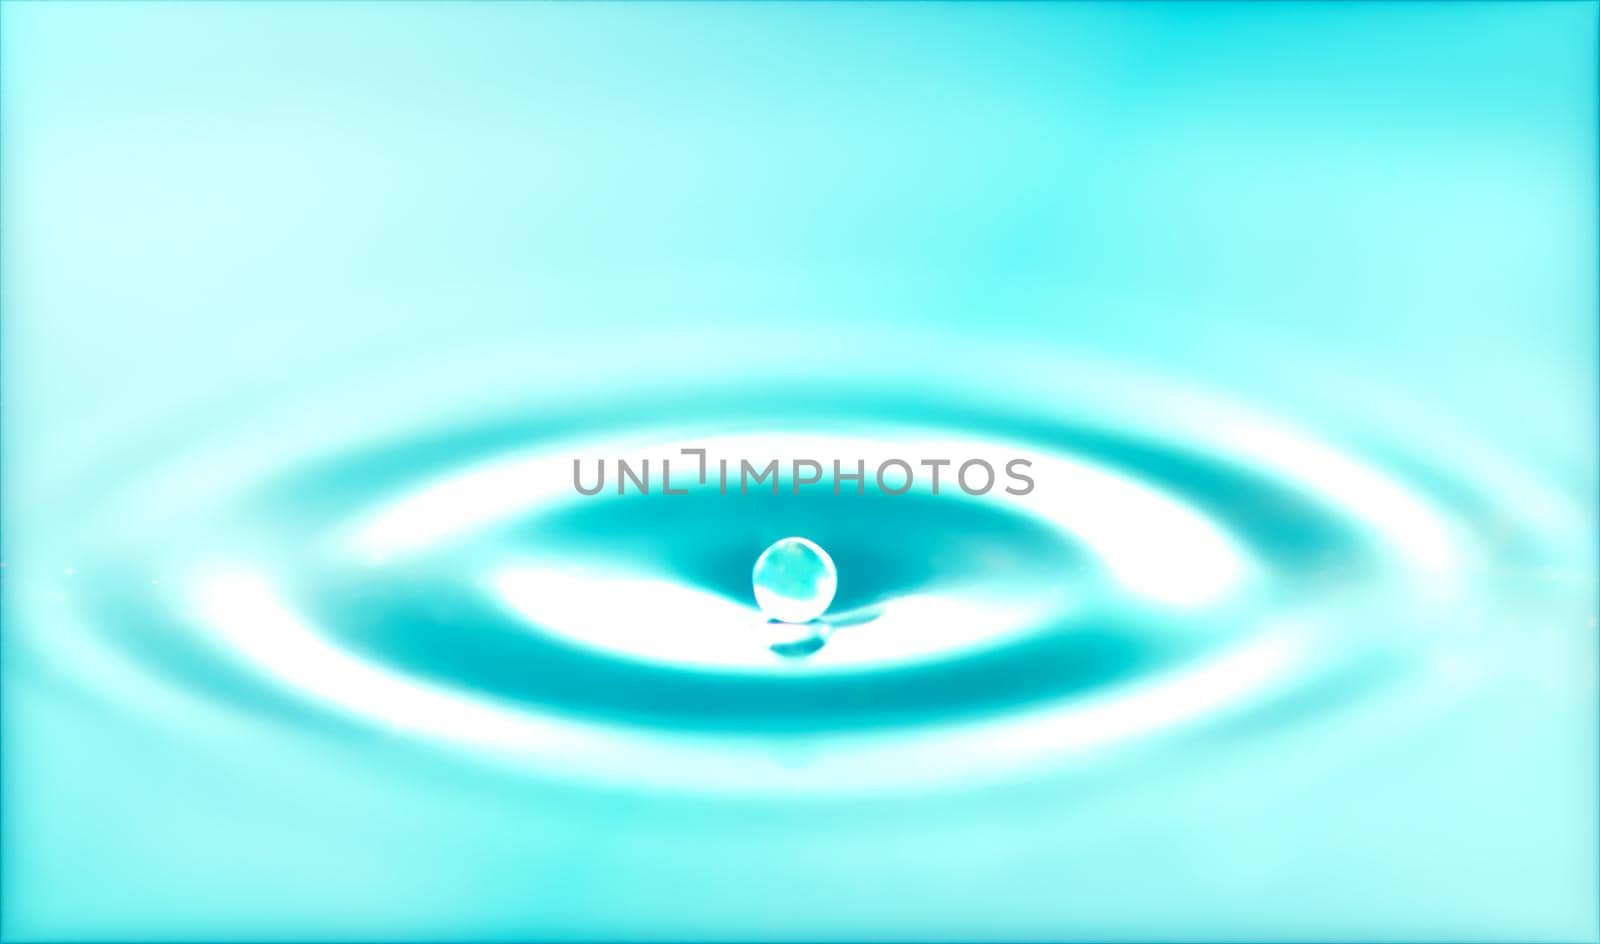 Abstract Water Drop Sphere Background Image Blue Tone Select Focus Water Drop by noppha80